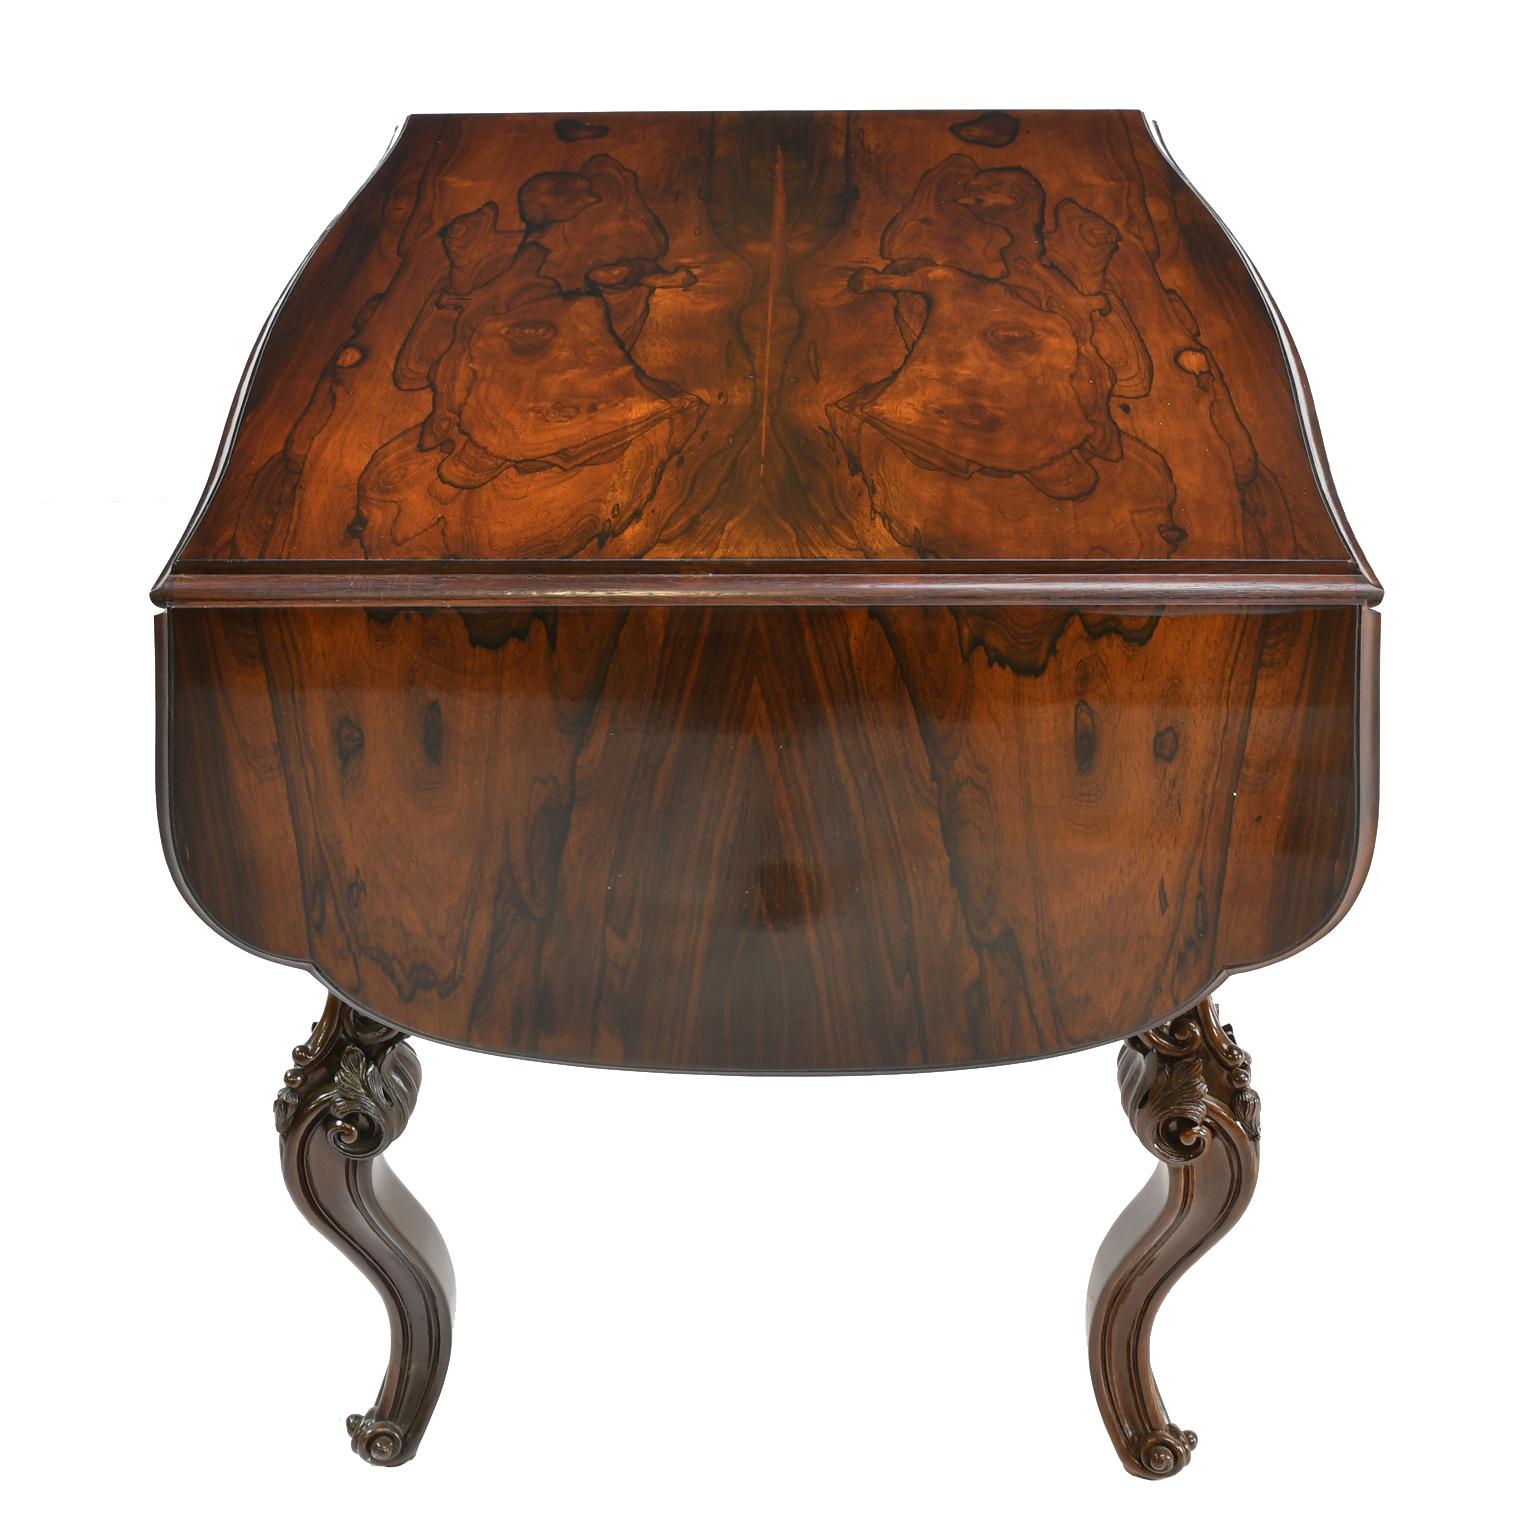 Hardwood Rosewood American Rococo Revival Sofa Table or Writing Table NYC, circa 1840 For Sale